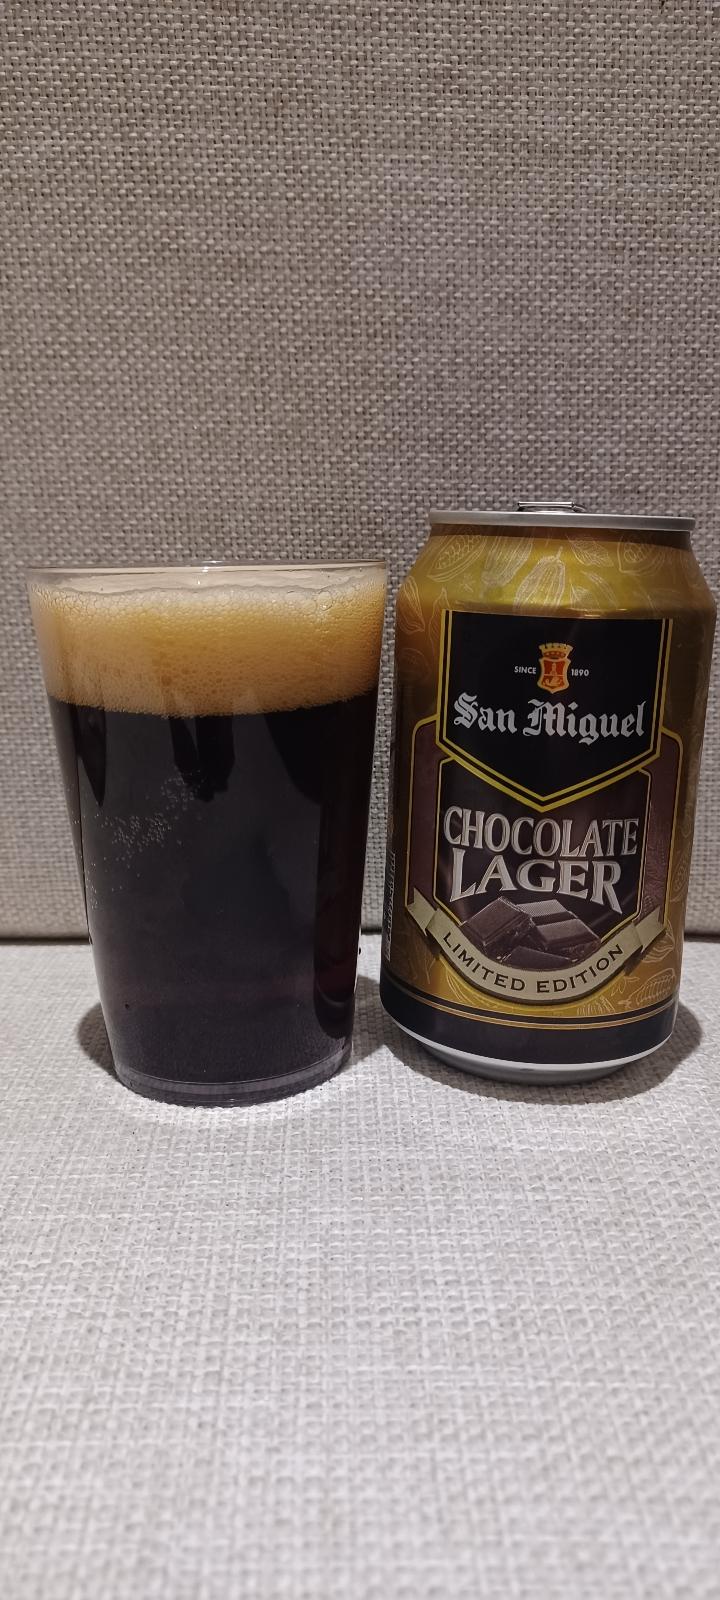 San Miguel Chocolate Lager